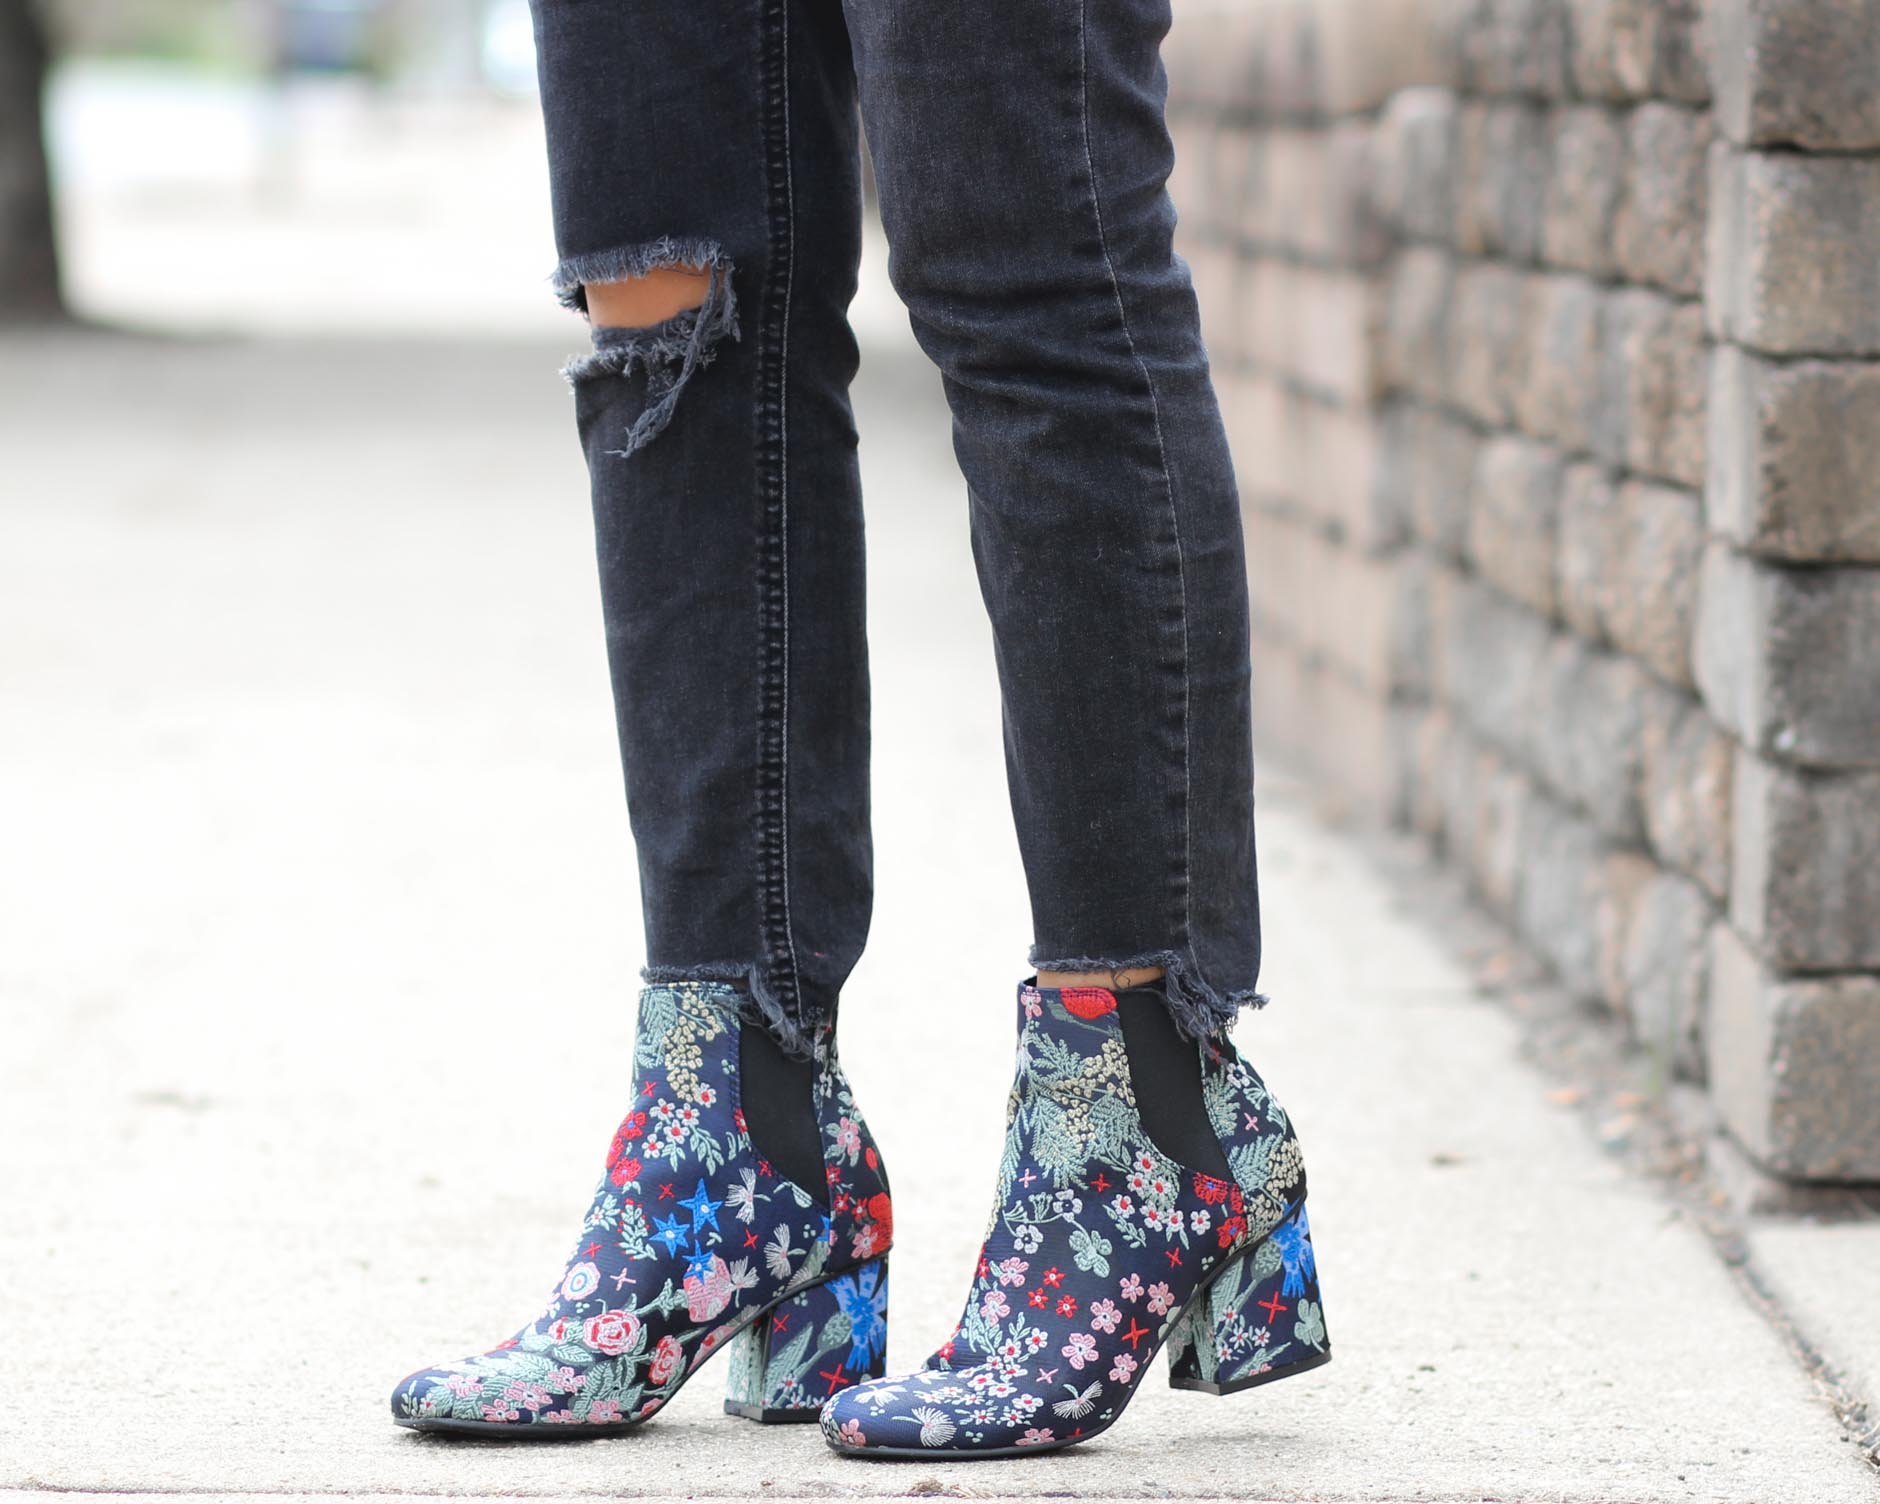 OTK Boots & Floral Booties - Naty Michele